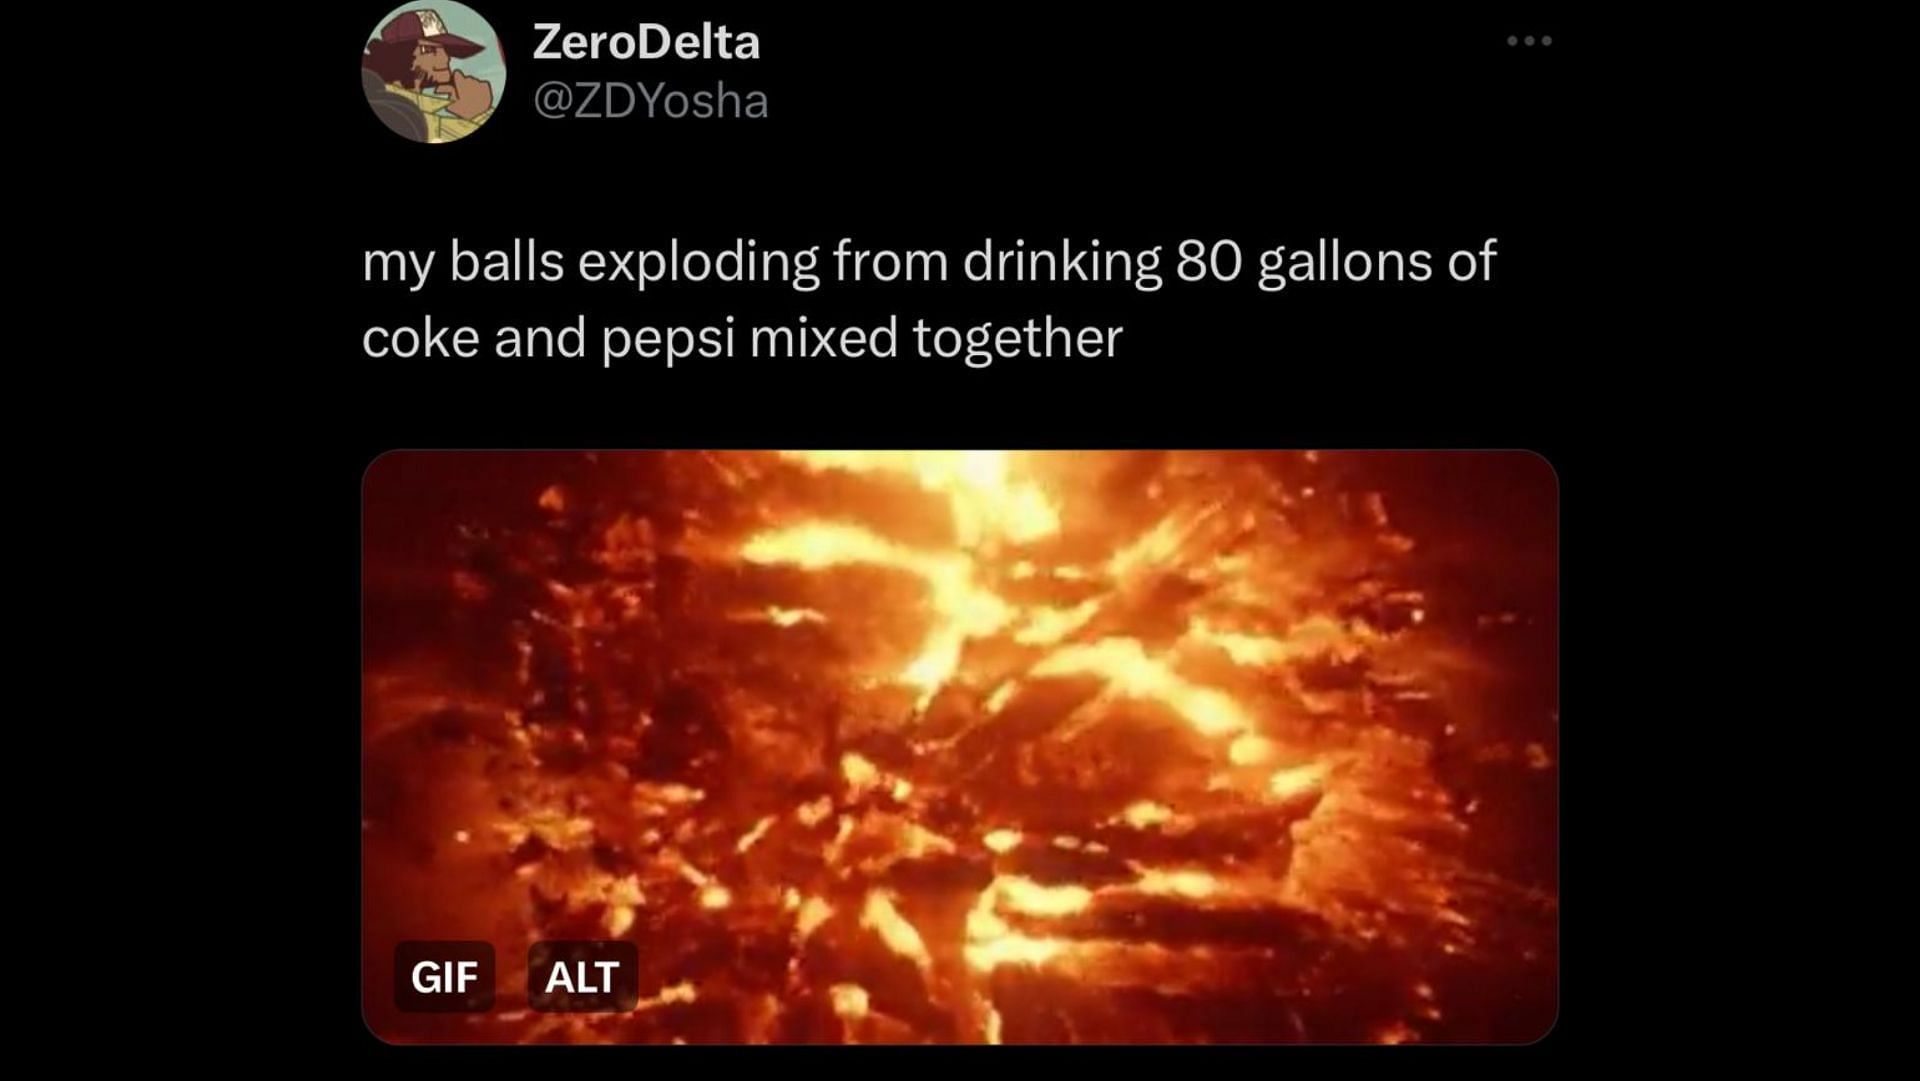 Screenshot of a Twitter user responding to the claim that consuming aerated drinks could lead to larger testicles and higher testosterone levels.